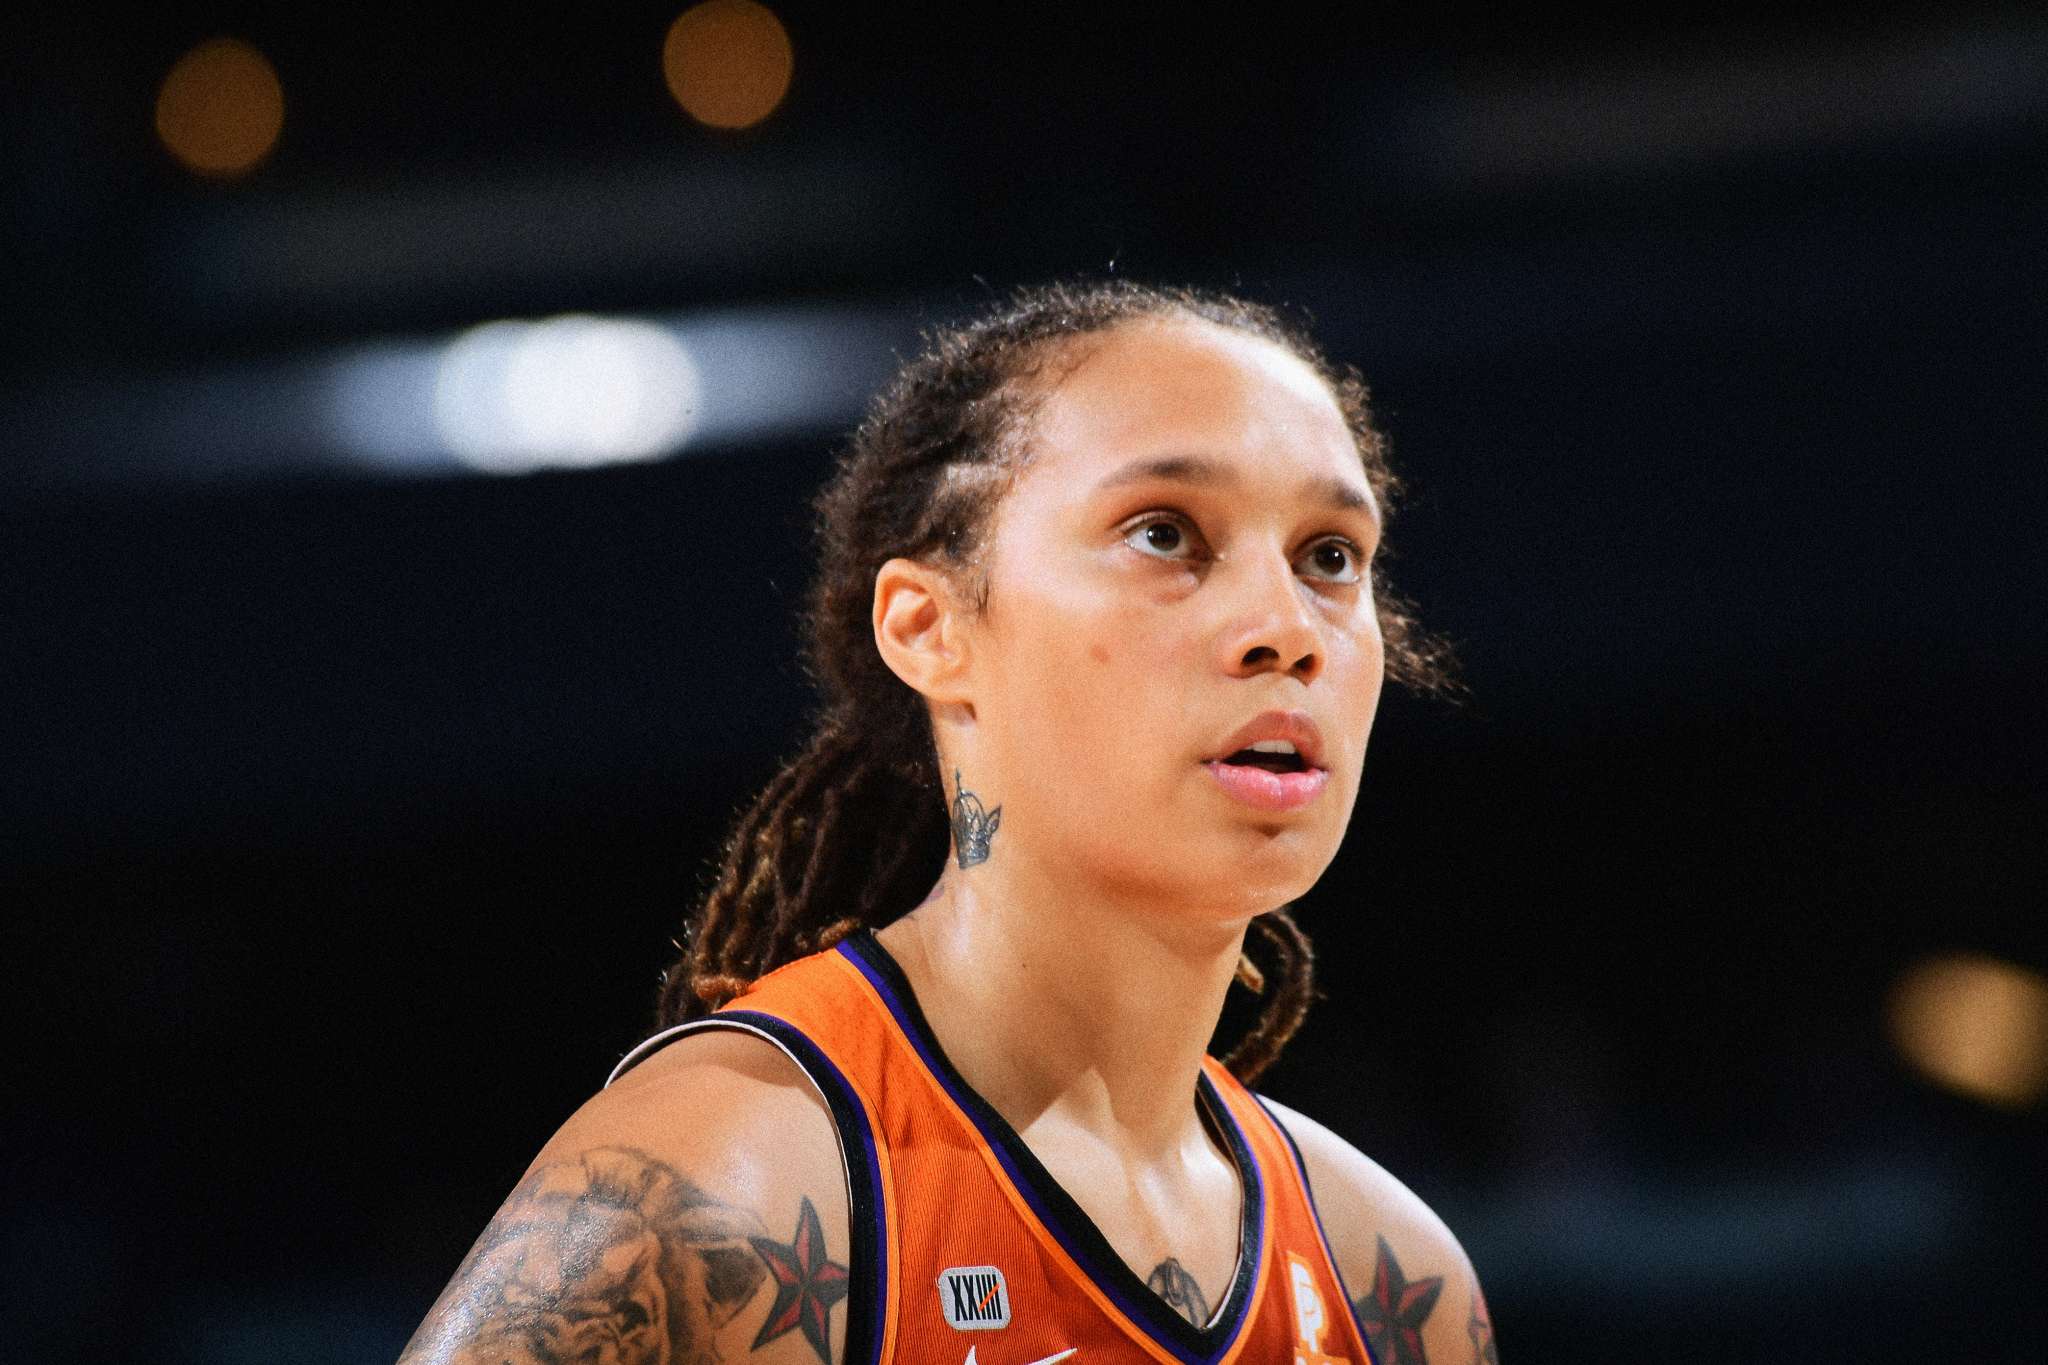 Brittney Griner’s Nine-Year Prison Sentence Has Angered Celebrities Who Are Now Protesting